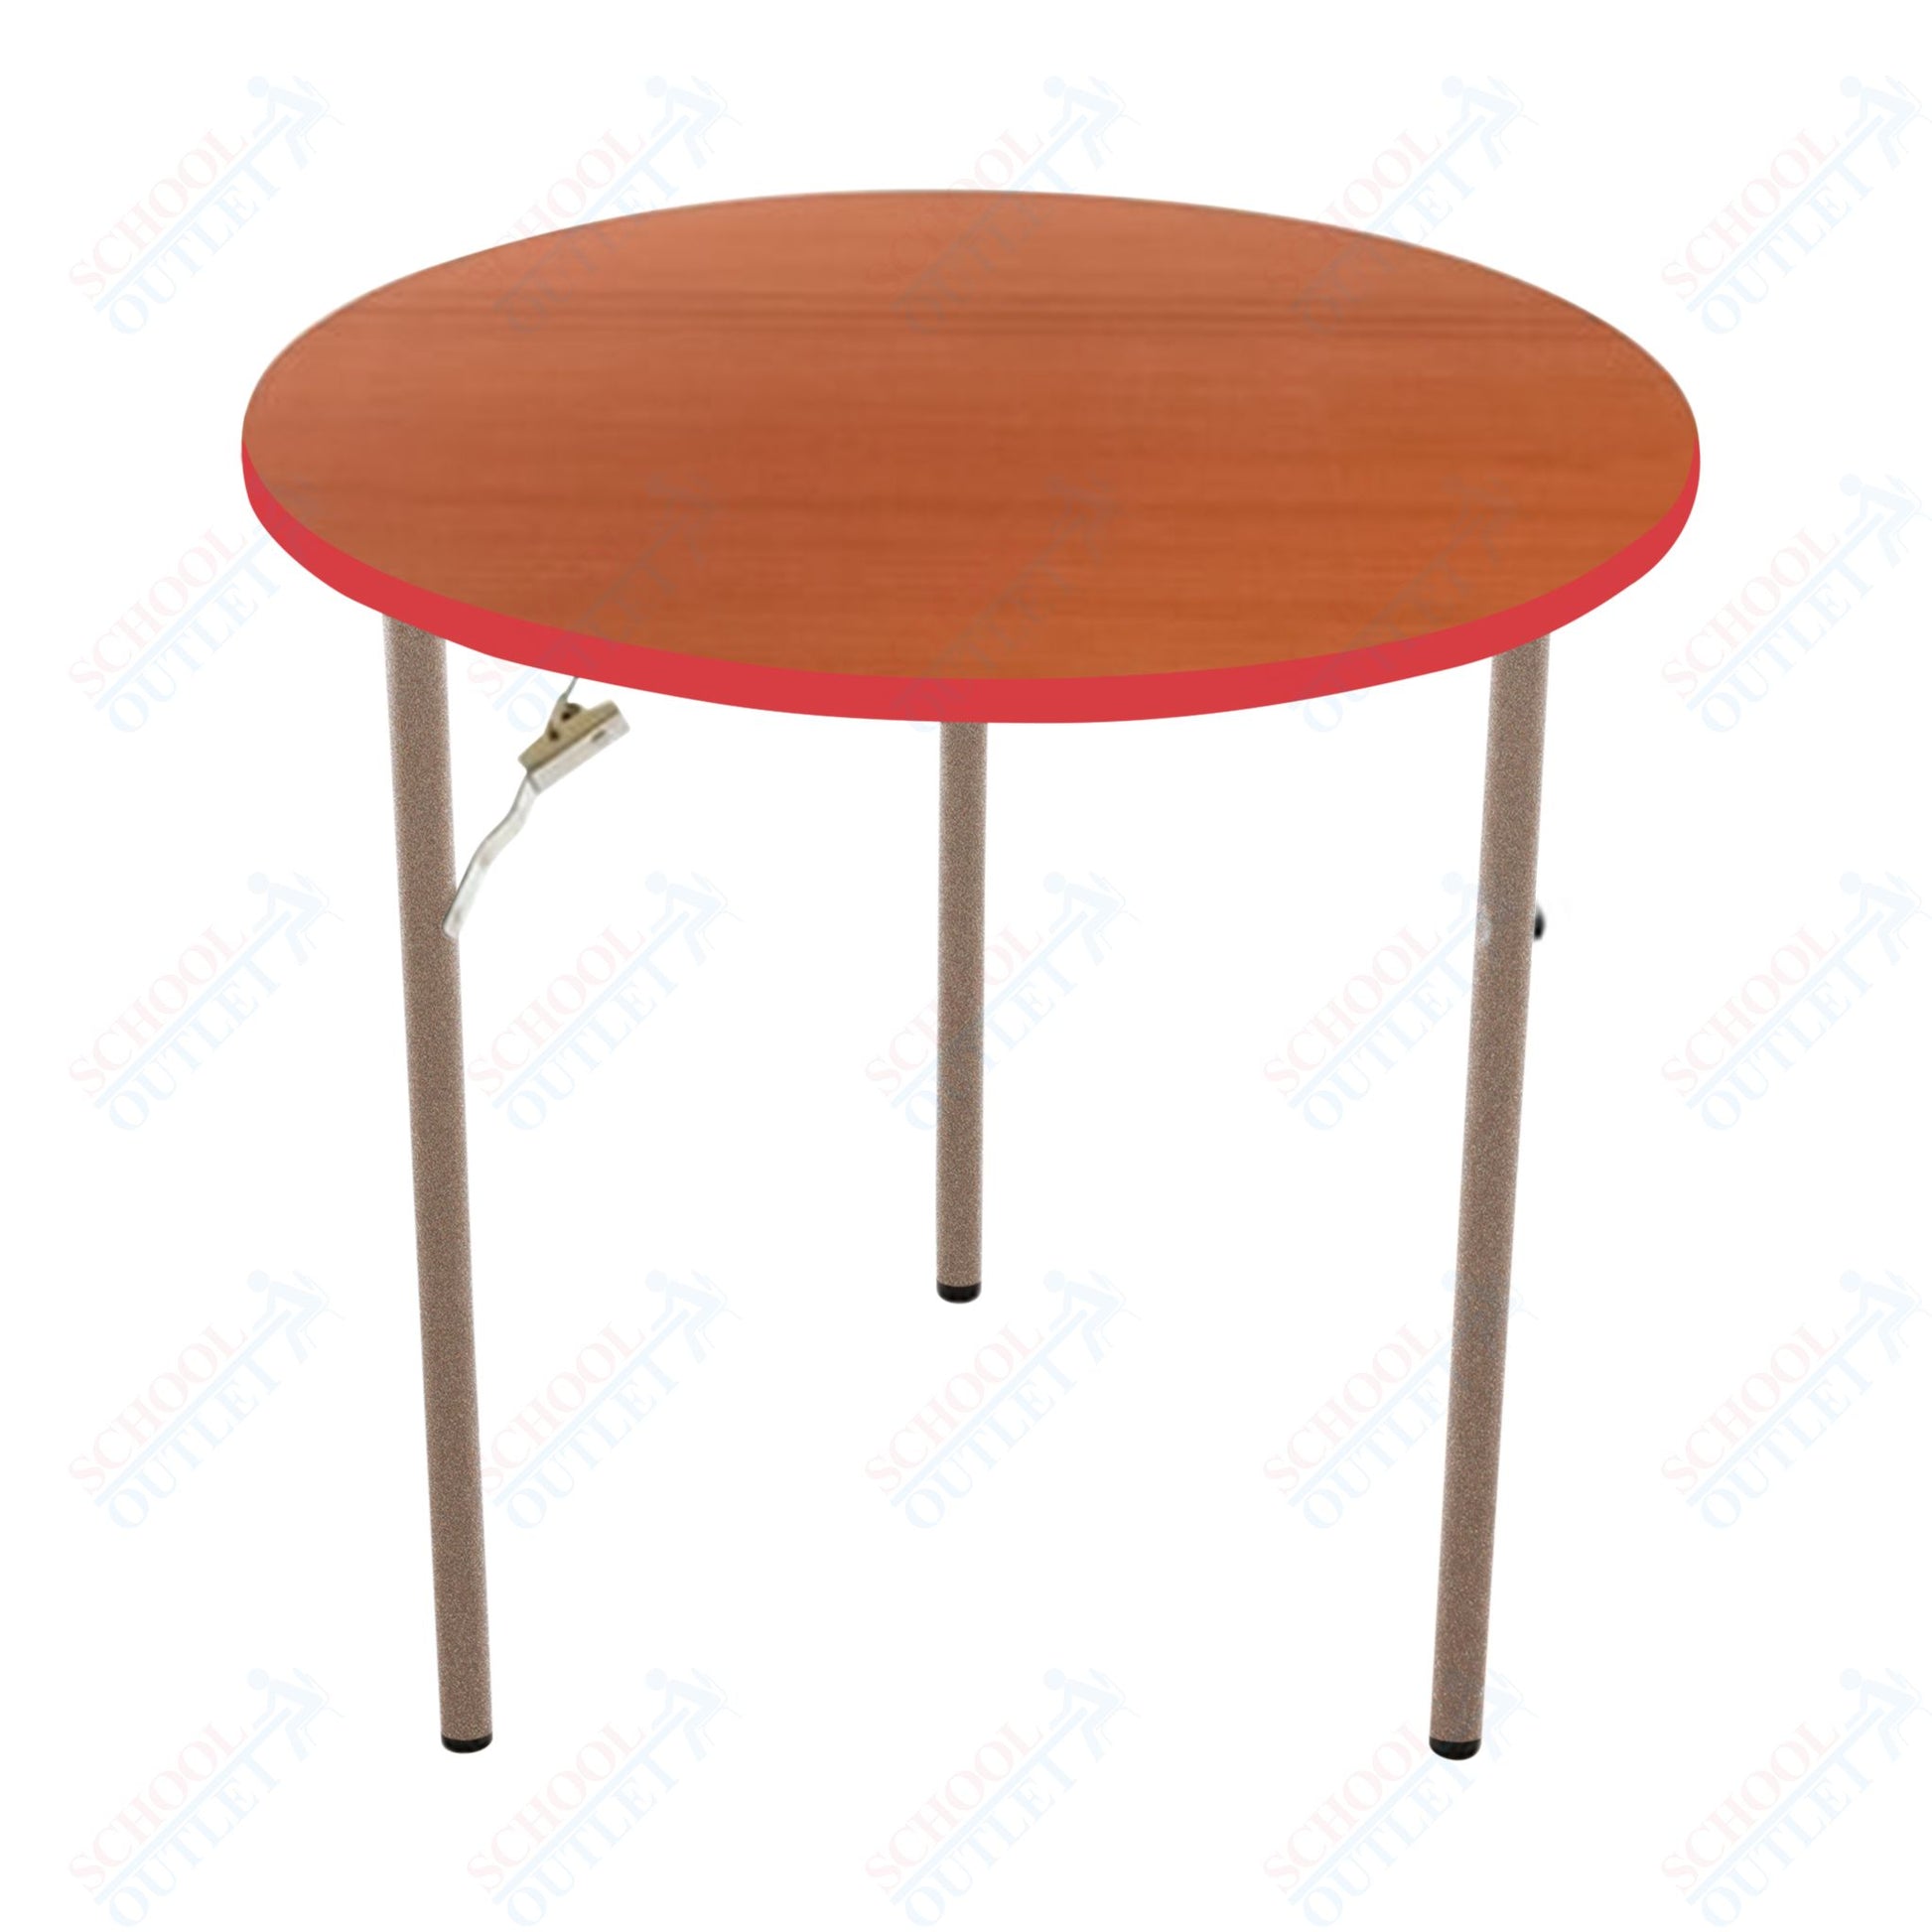 AmTab Folding Table - Plywood Stained and Sealed - Vinyl T - Molding Edge - Round - 54" Diameter x 29"H (AmTab AMT - R54PM) - SchoolOutlet